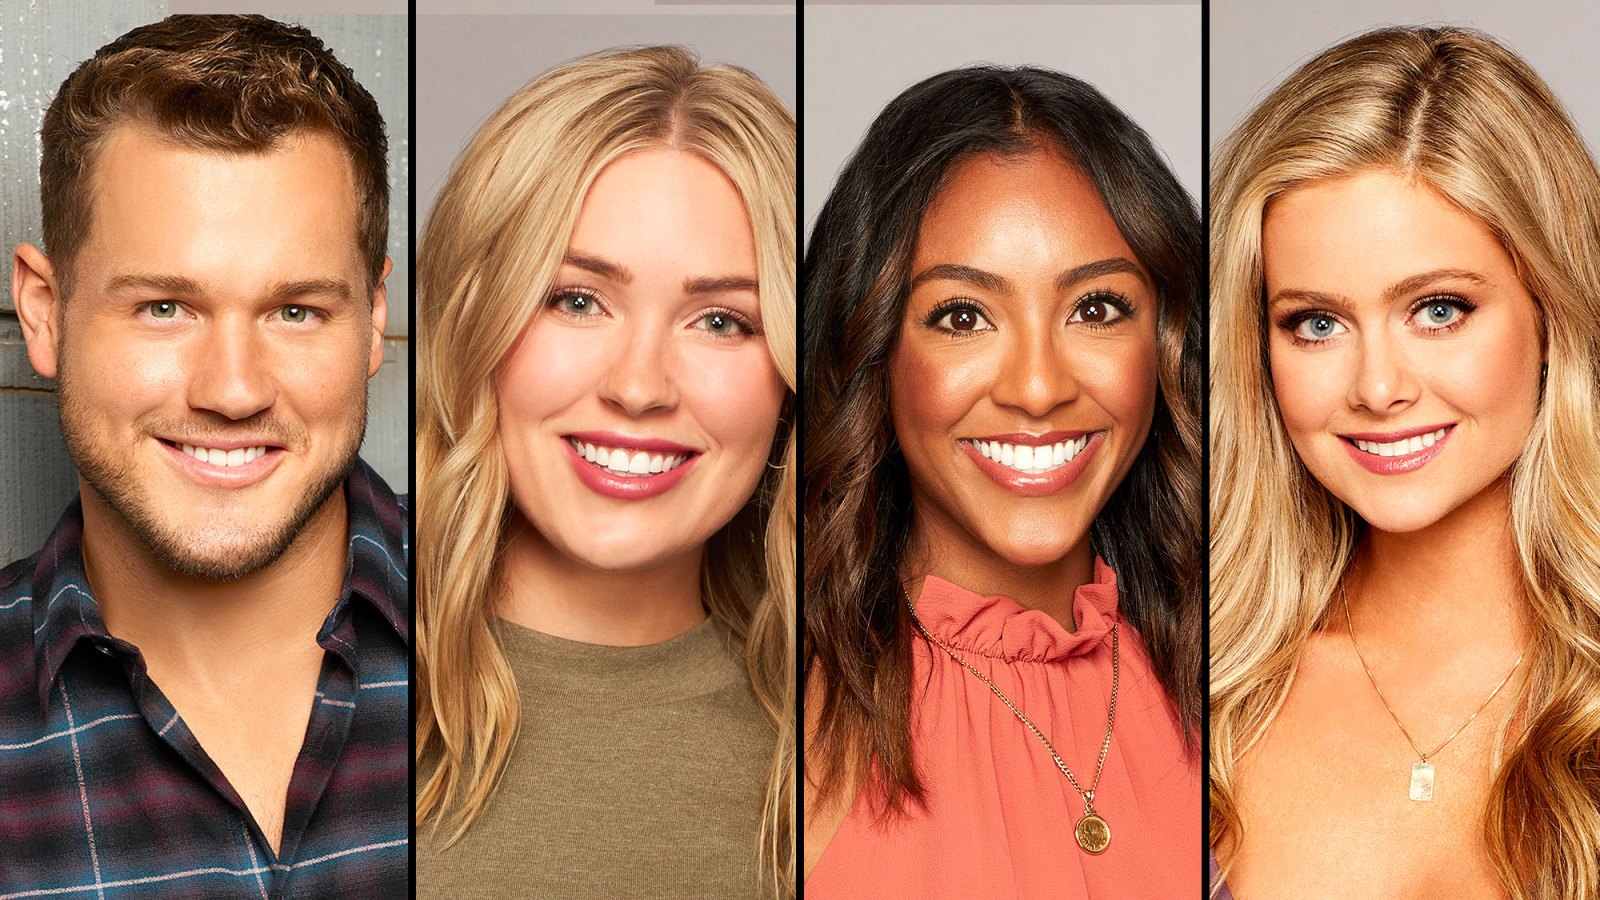 Bachelor Alums Have Mixed Feelings About Colton Breaking Up With Tayshia and Hannah G. for Cassie